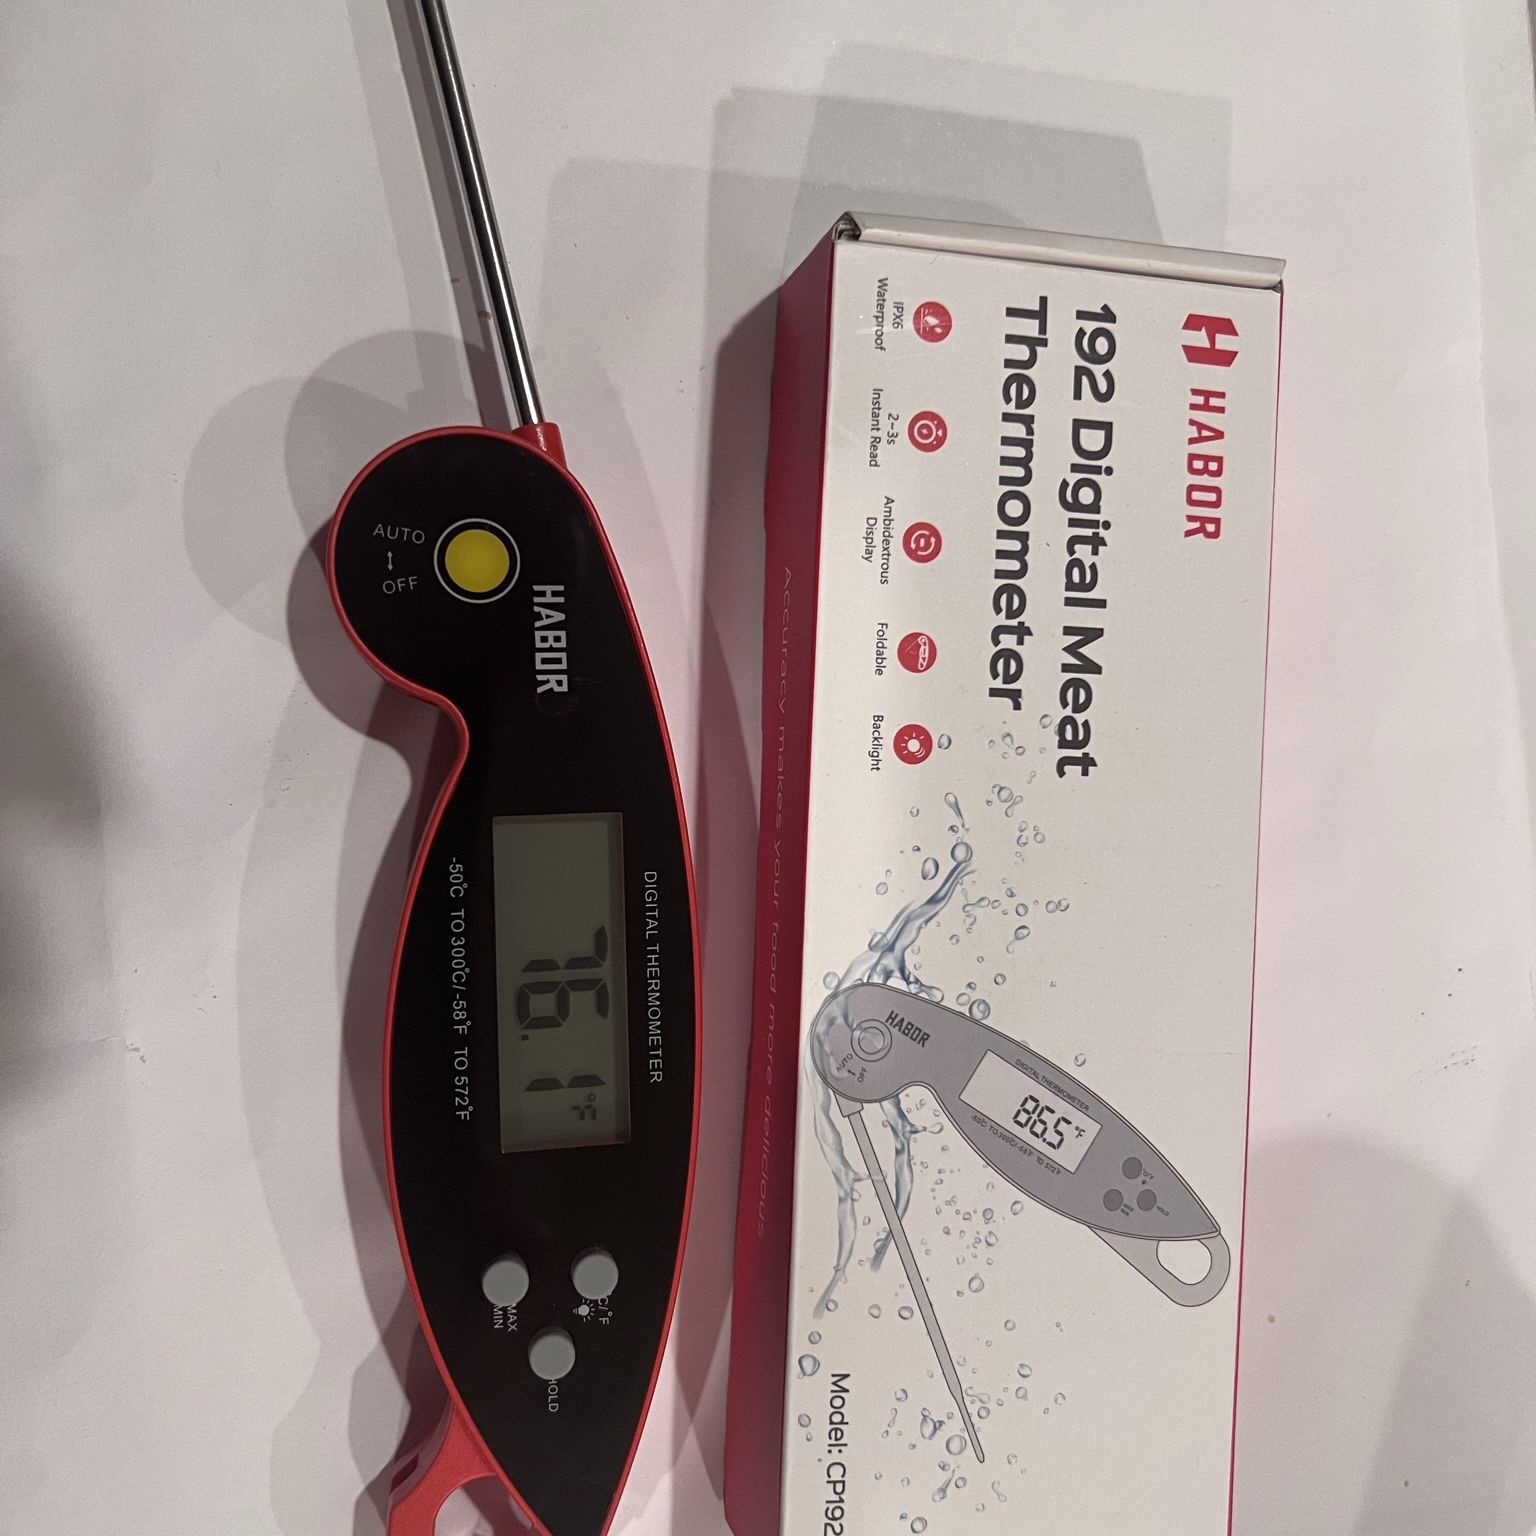 Harbor Digital Meat Thermometer for Sale in Tacoma, WA - OfferUp